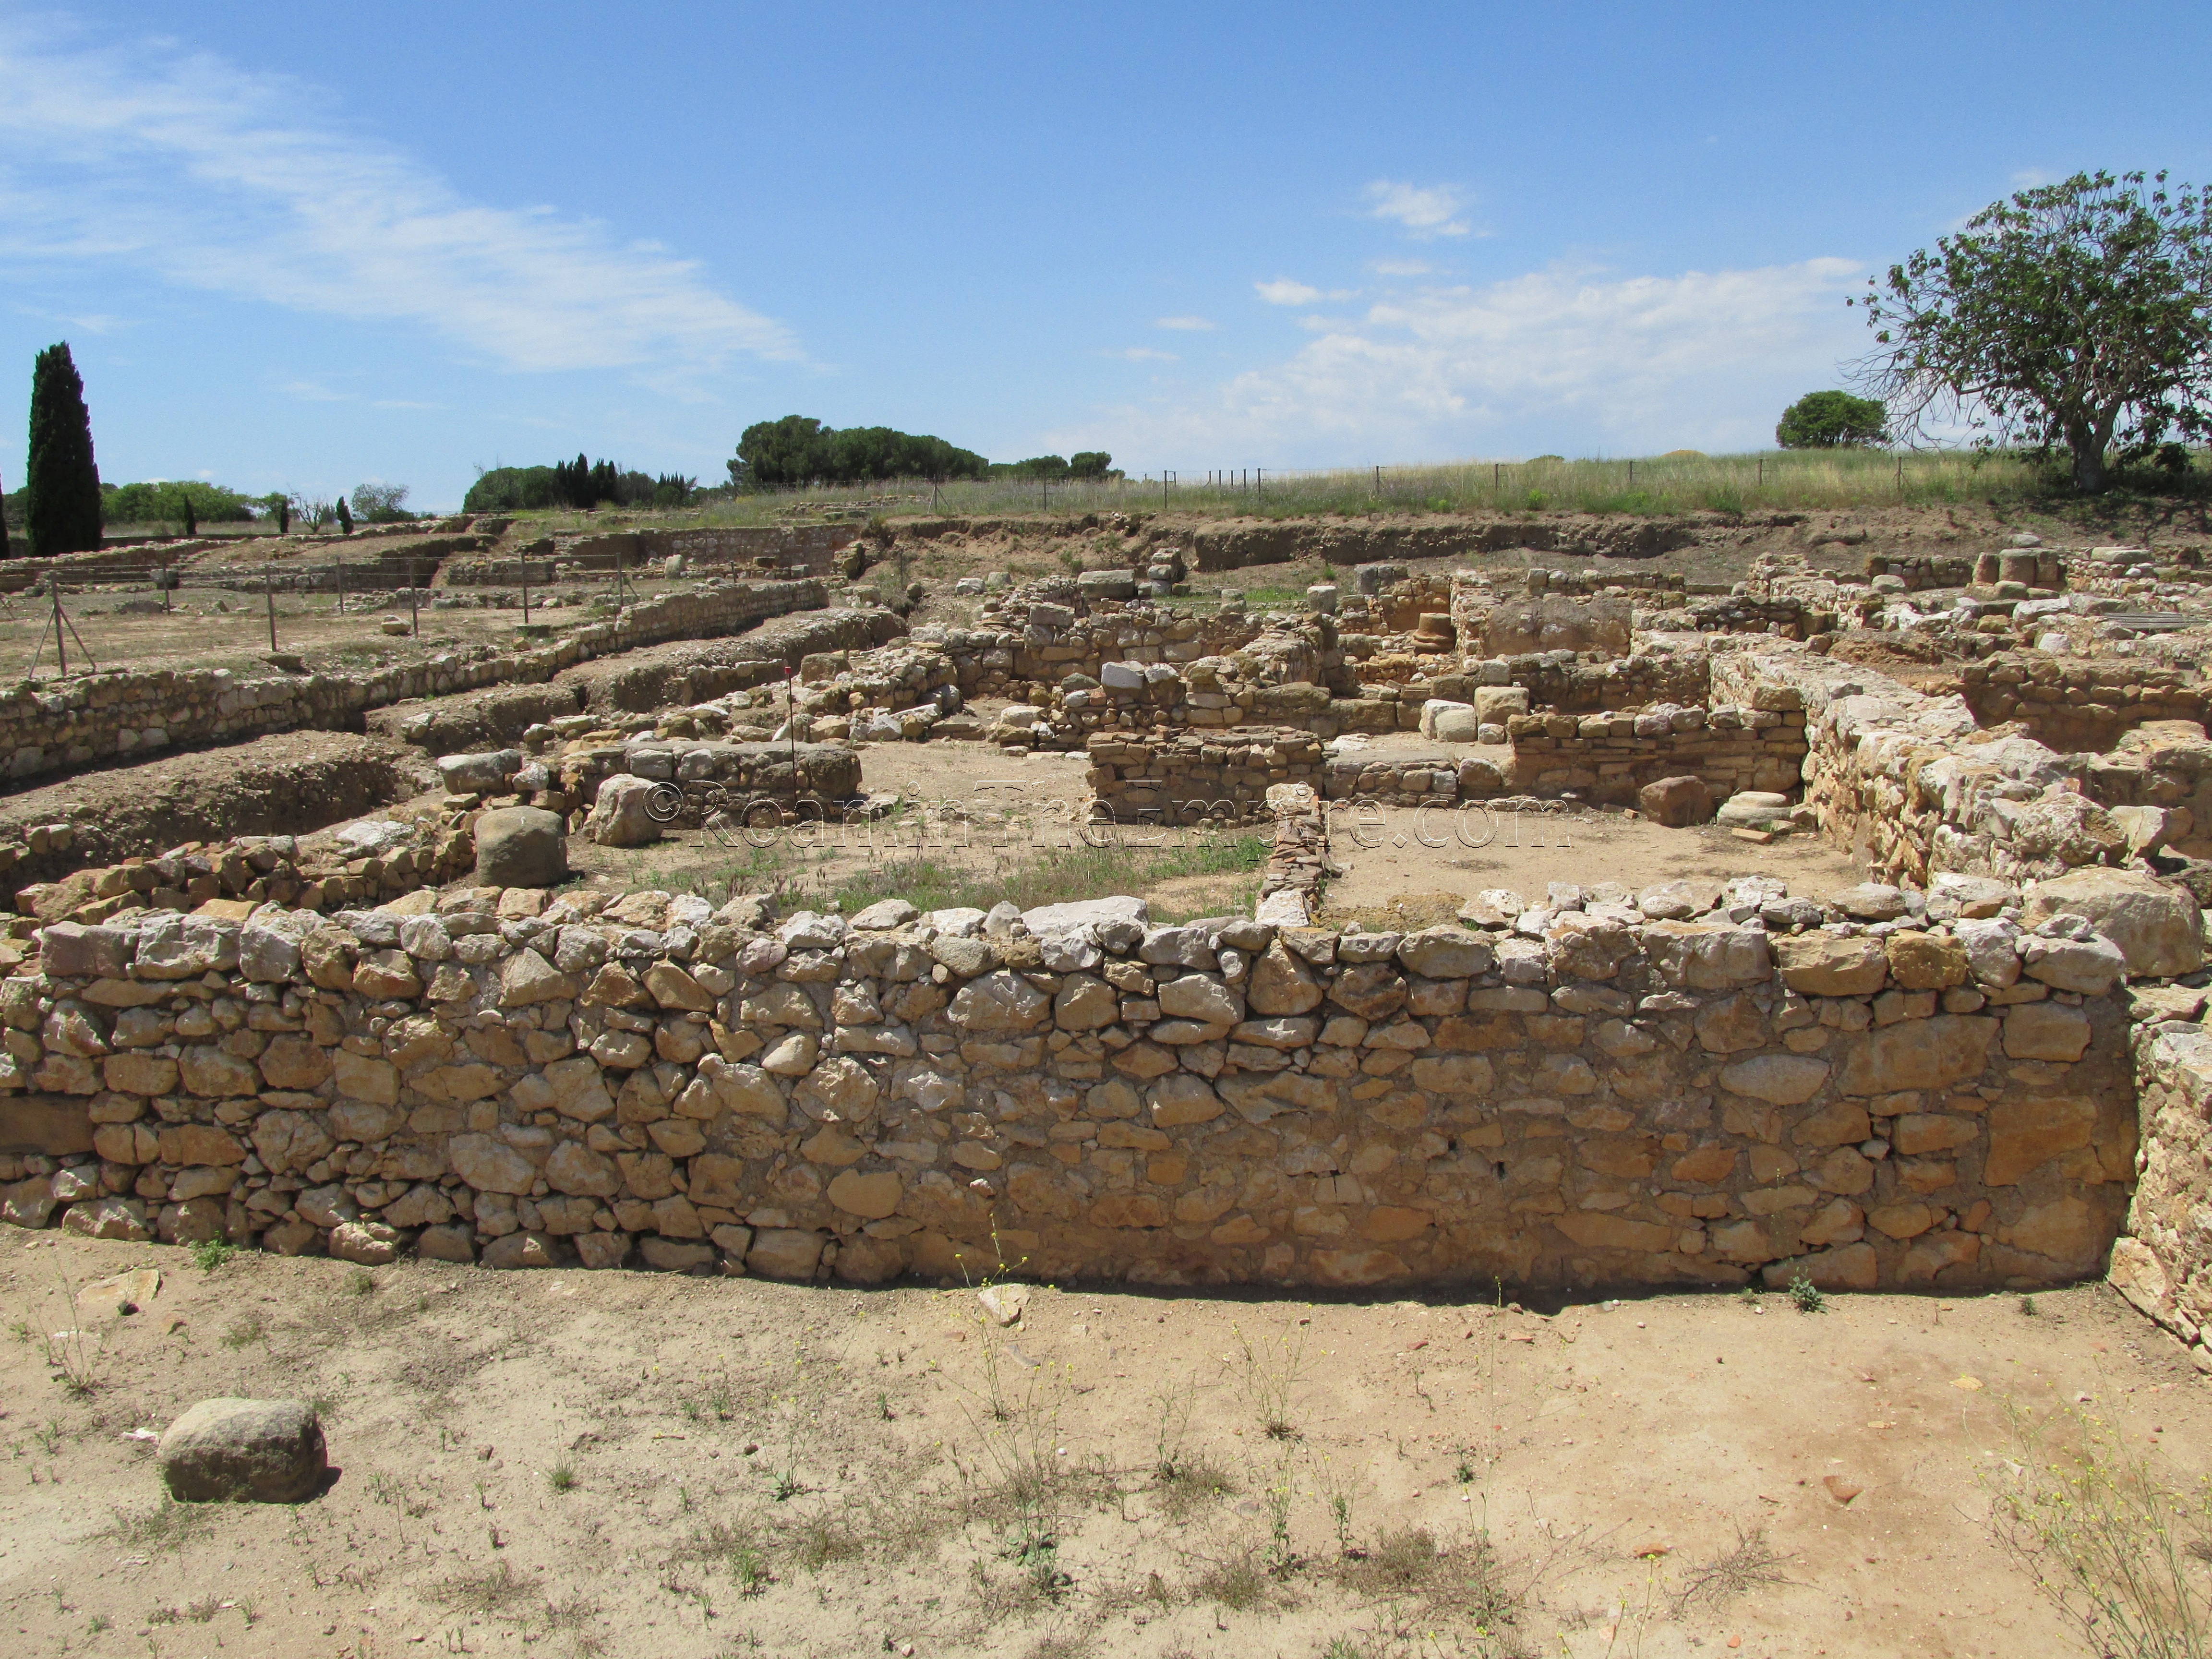 Tabernae in the southern section of Insula 30